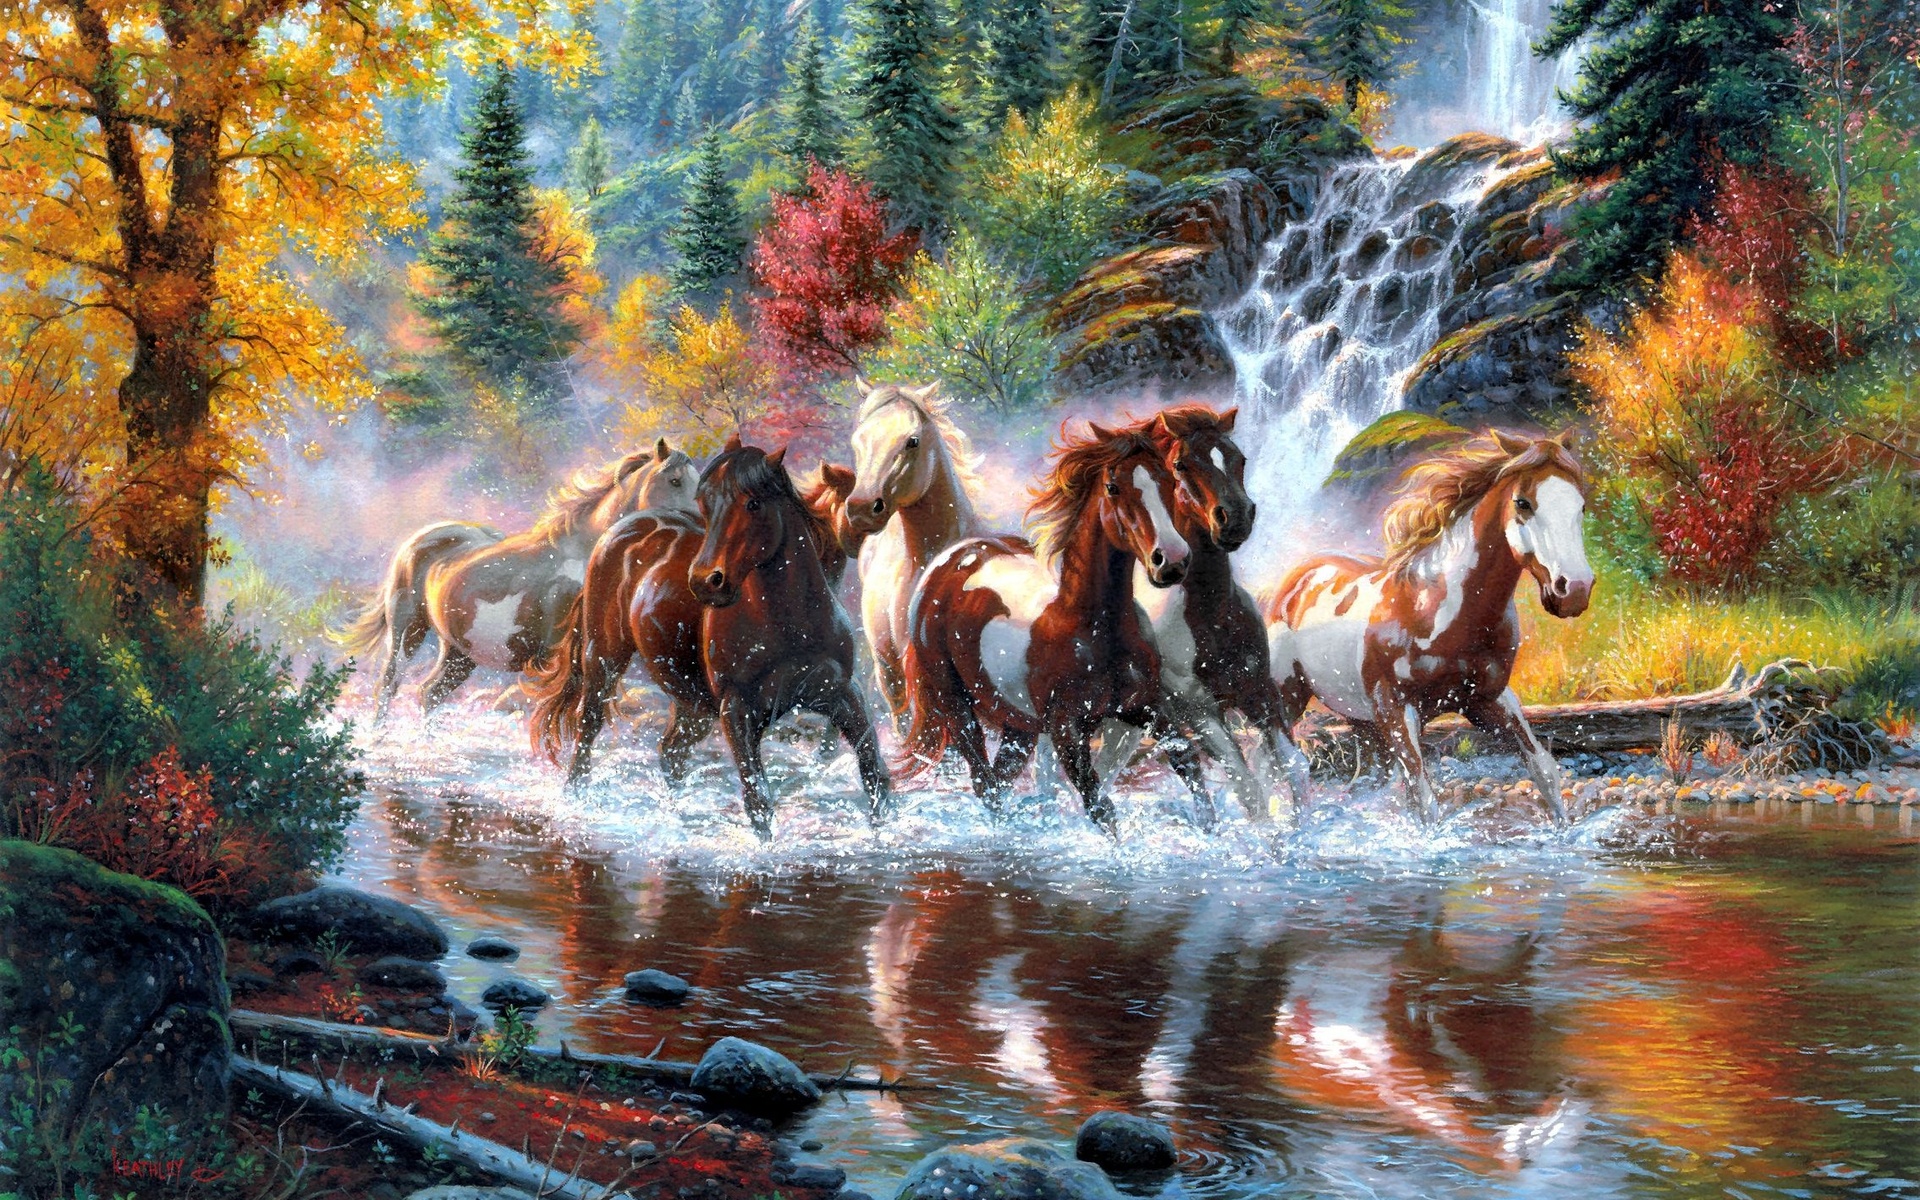 Horses Paintings Landscapes Nature Trees Forest Waterfall Autumn Fall